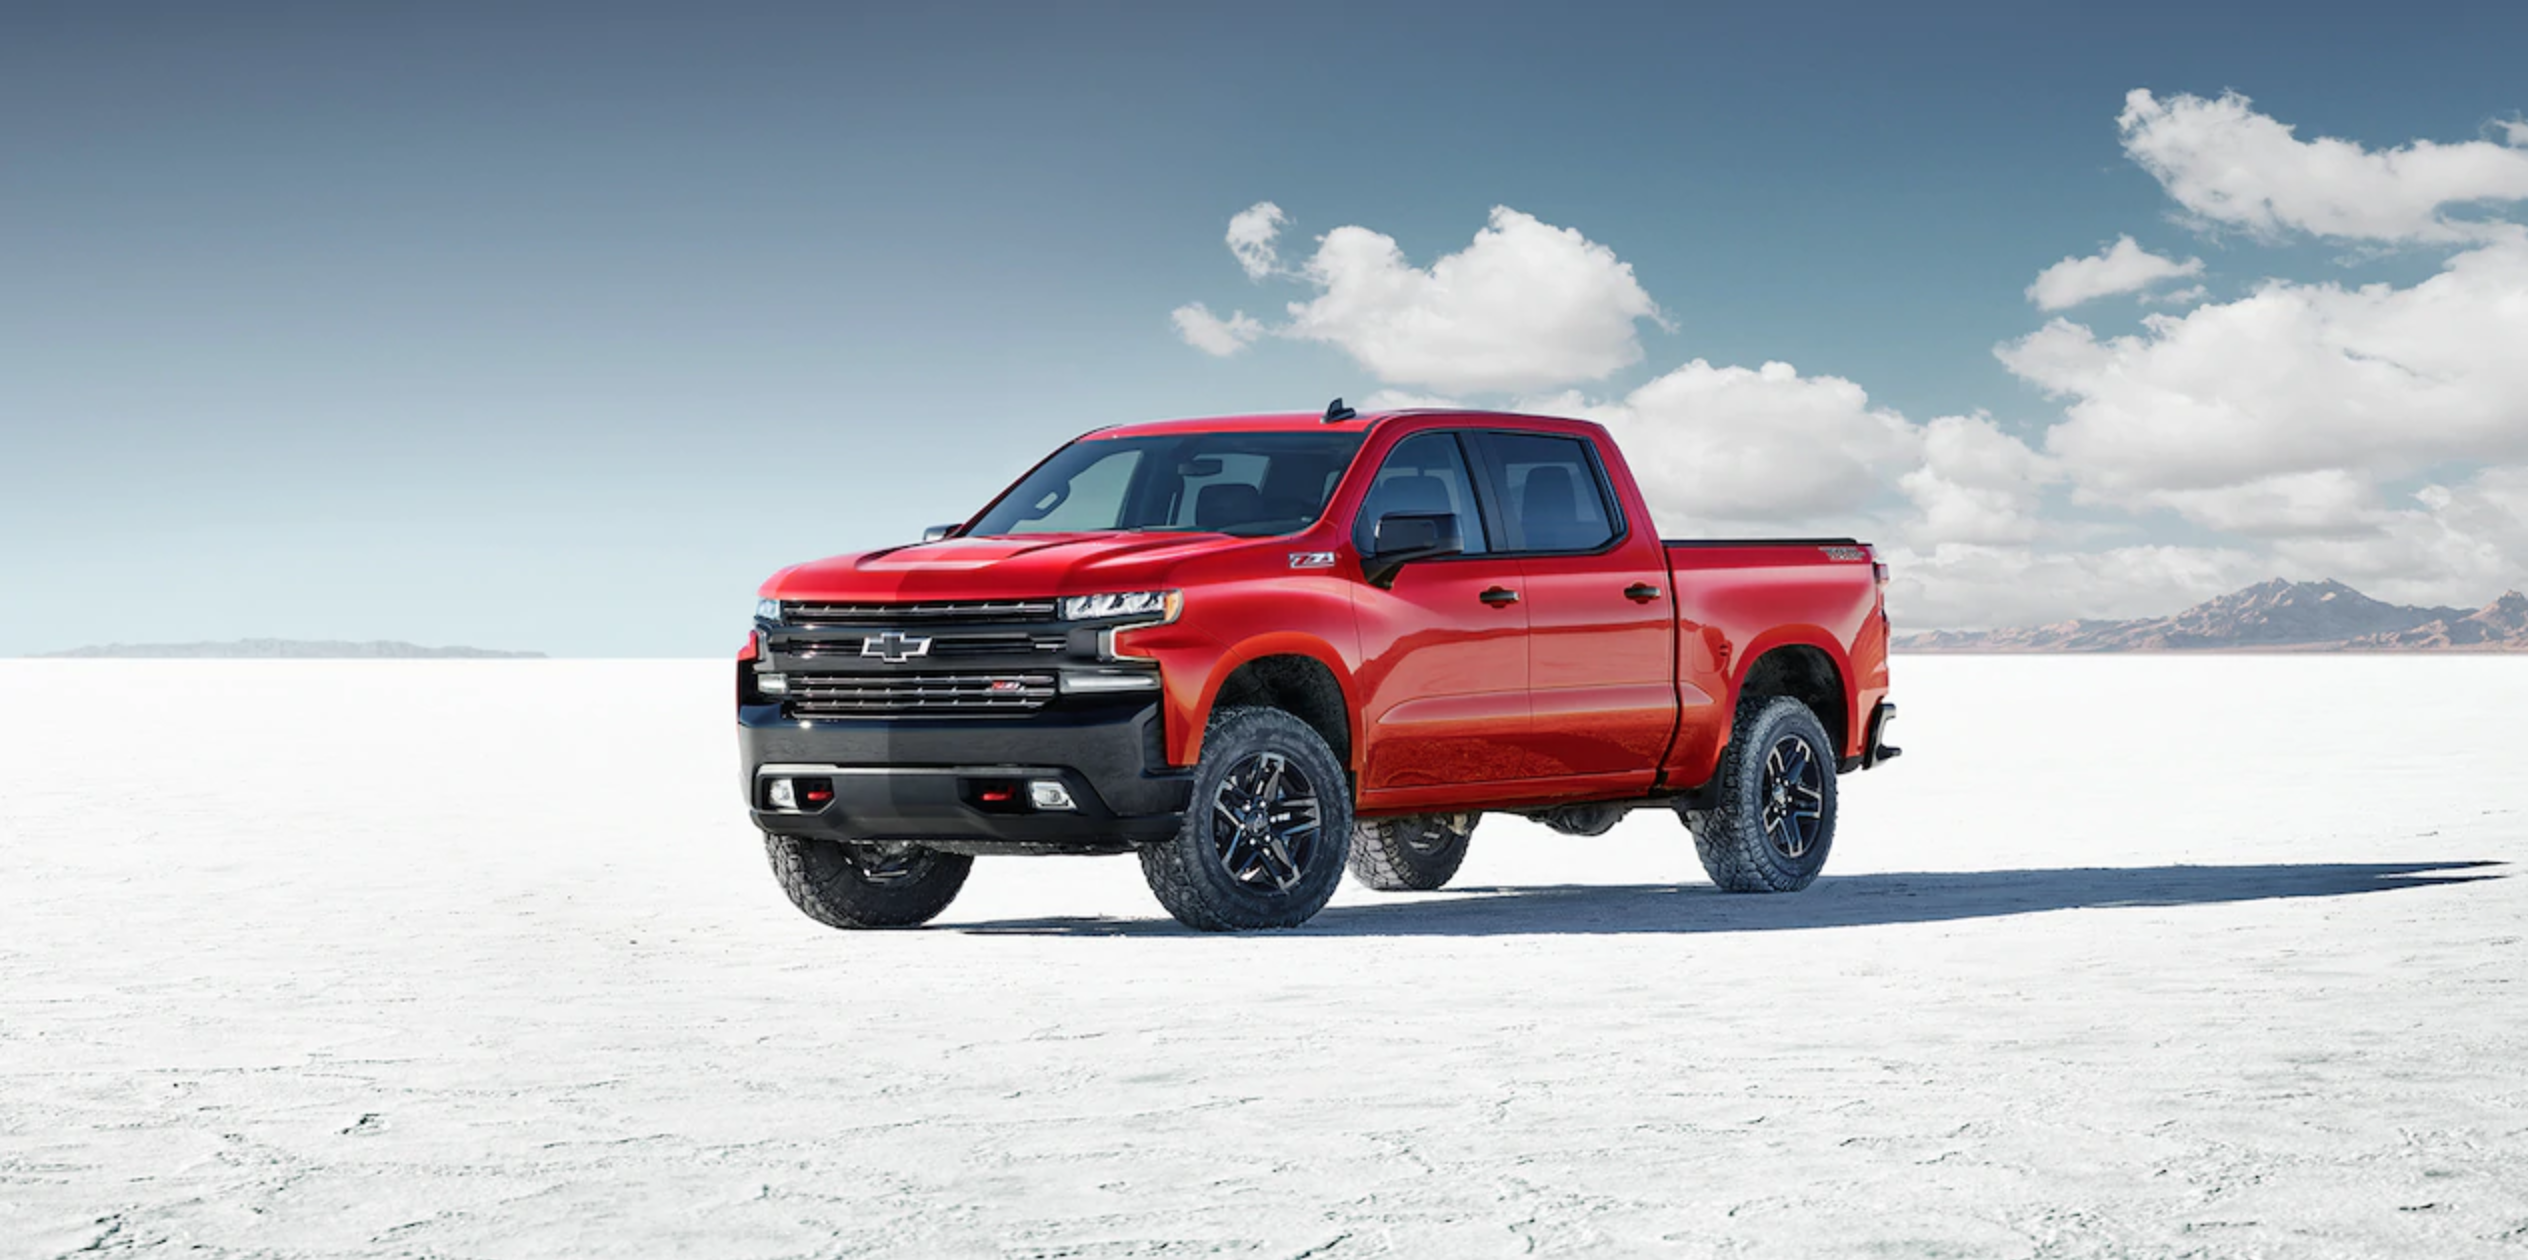 Chevy Silverado Trucks for Big and Tall People